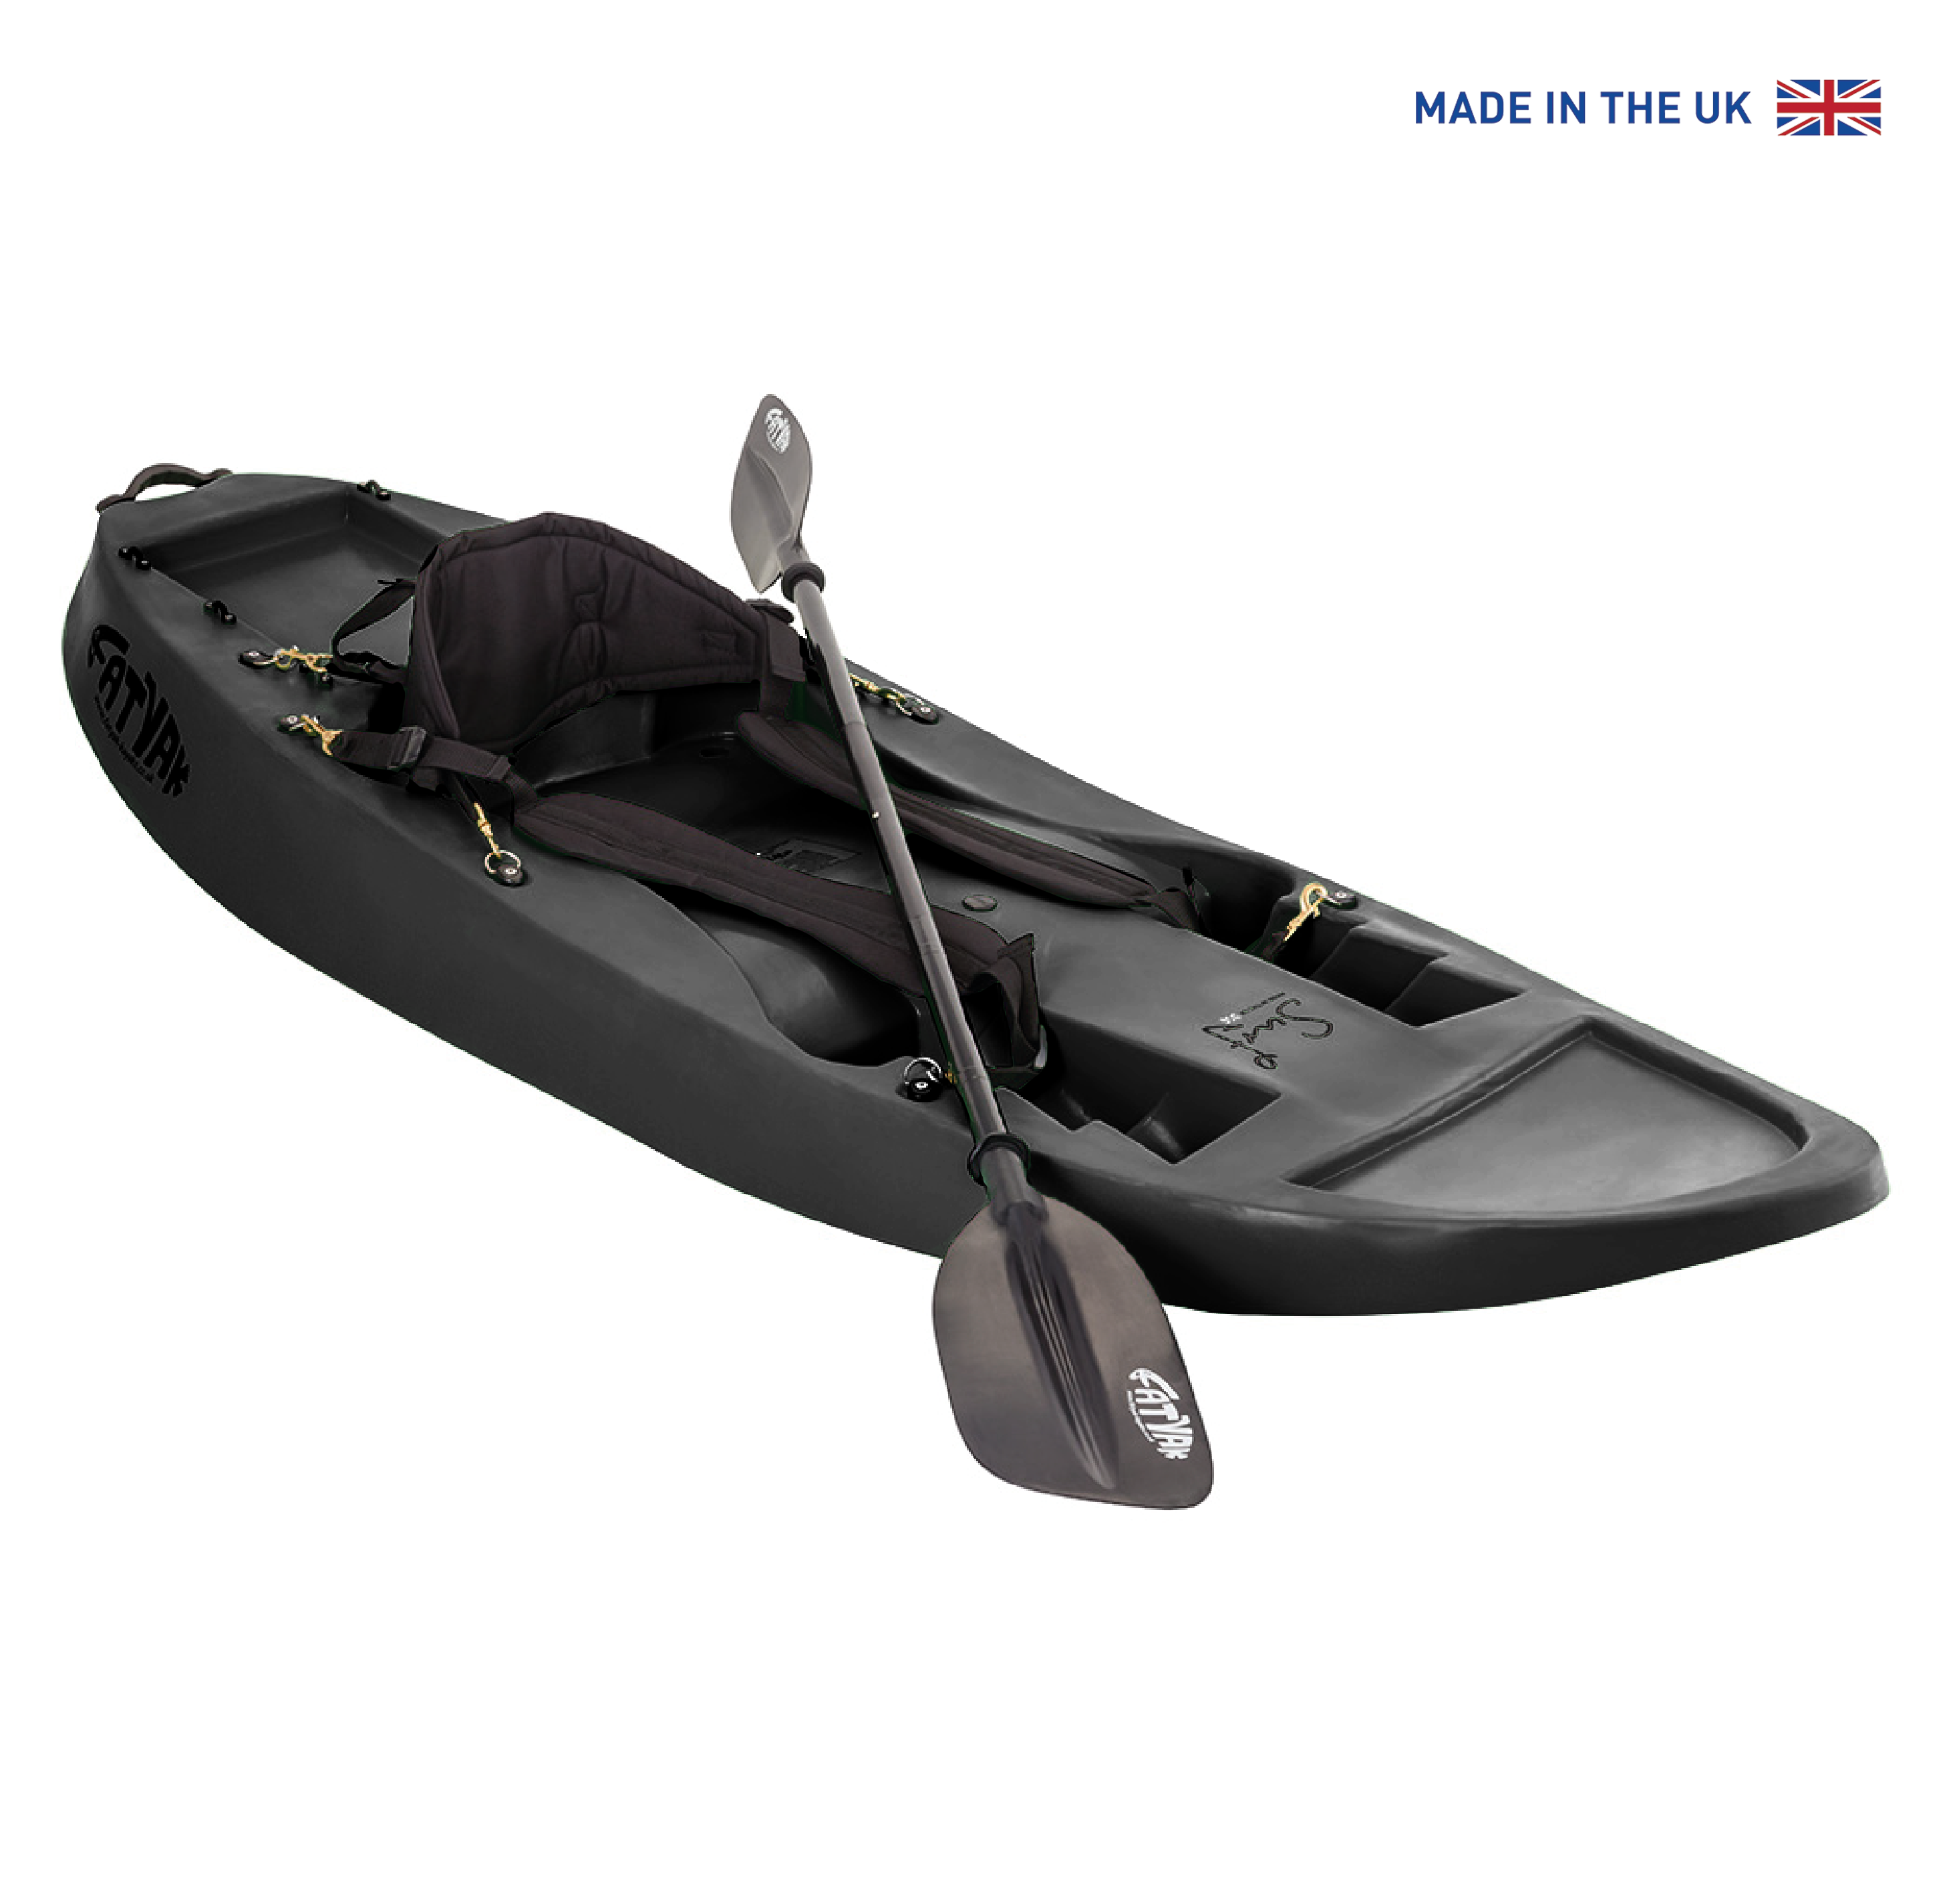 Surf Kayak from Fatyak™ Kayaks - designed for the waves!